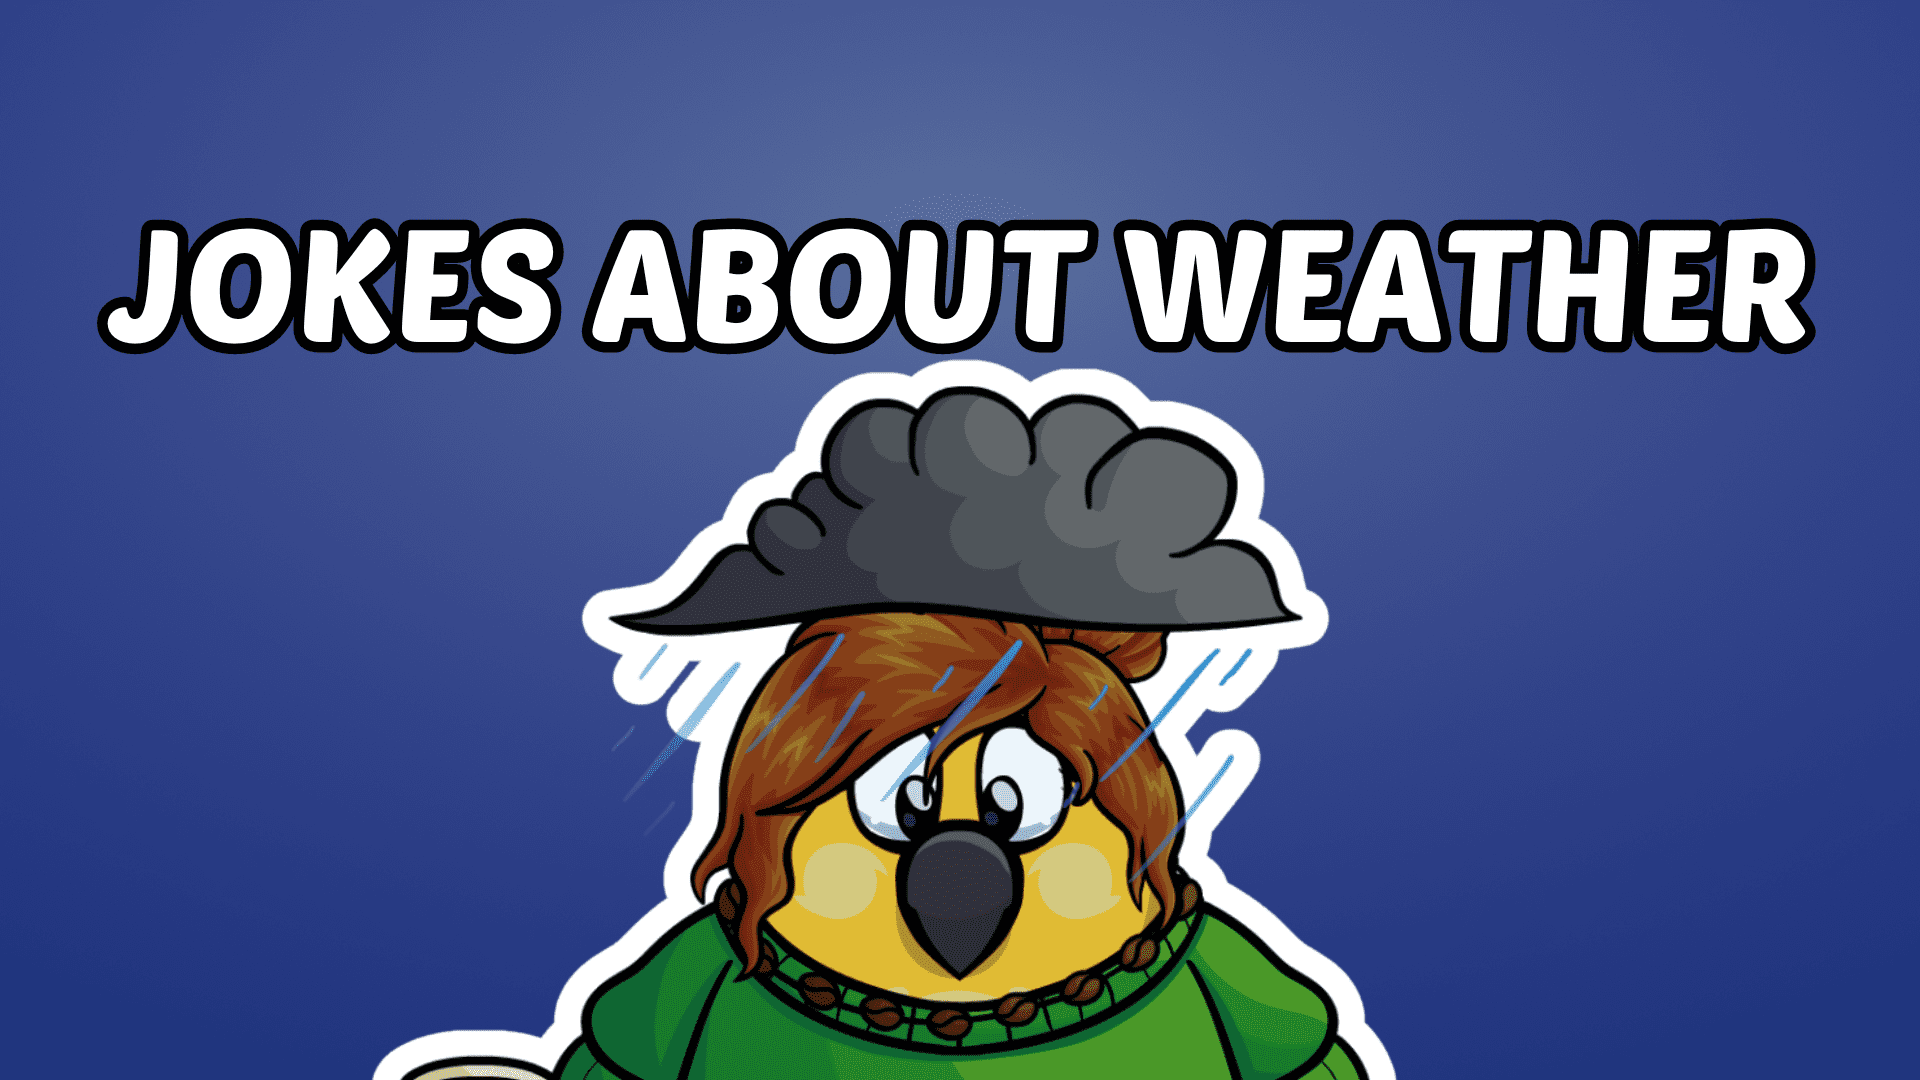 10 Jokes About Weather for Kids